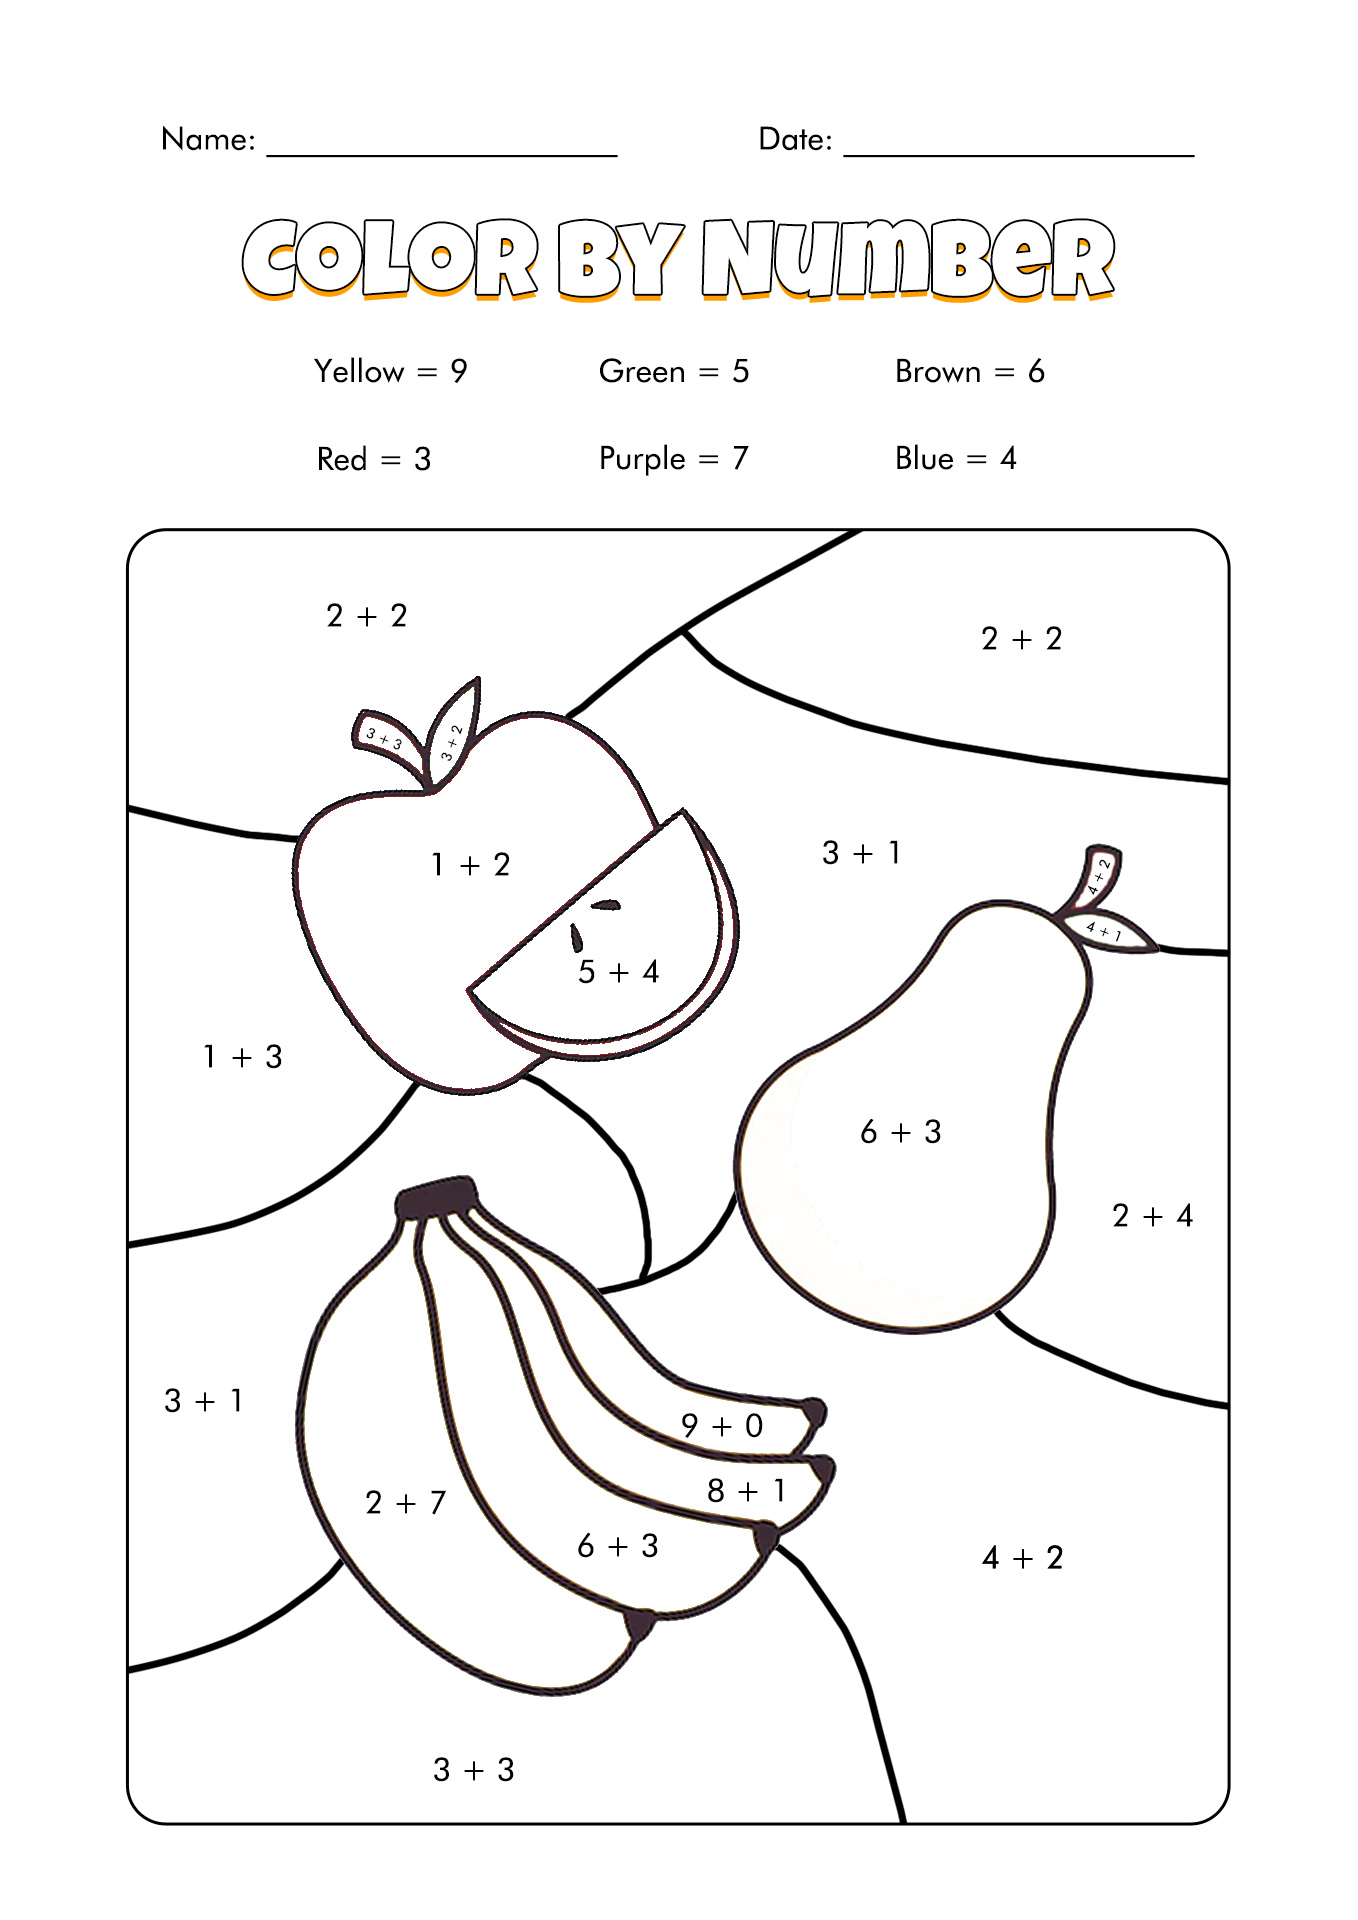 19 Best Images of Doubles Fact Practice Worksheet ...